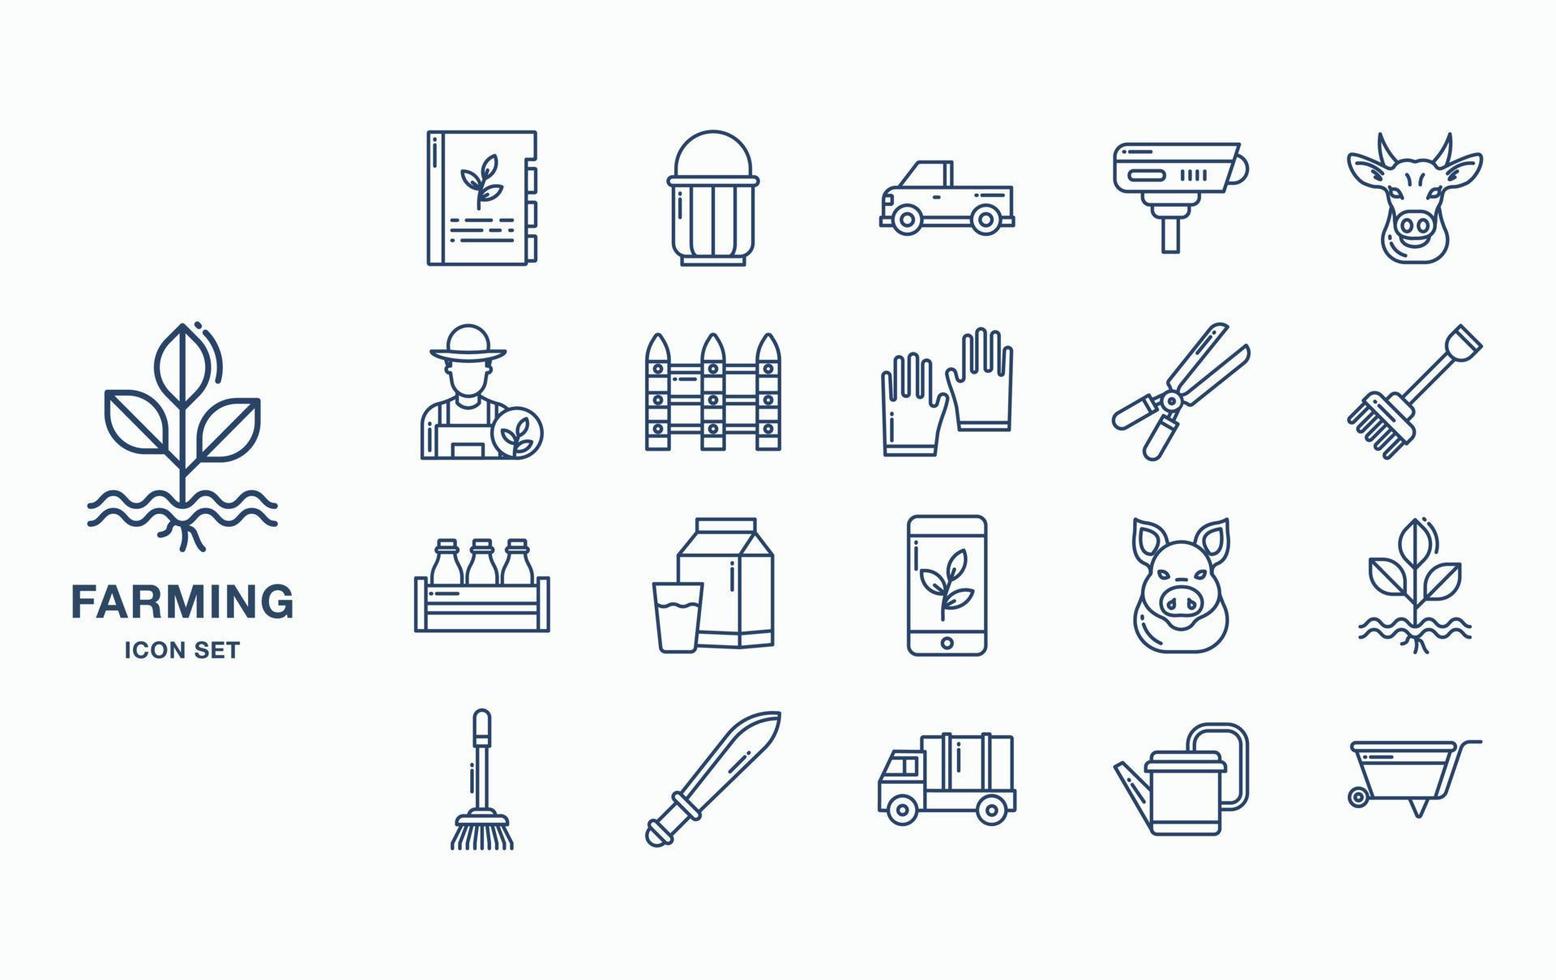 Farming and cultivation icon set vector